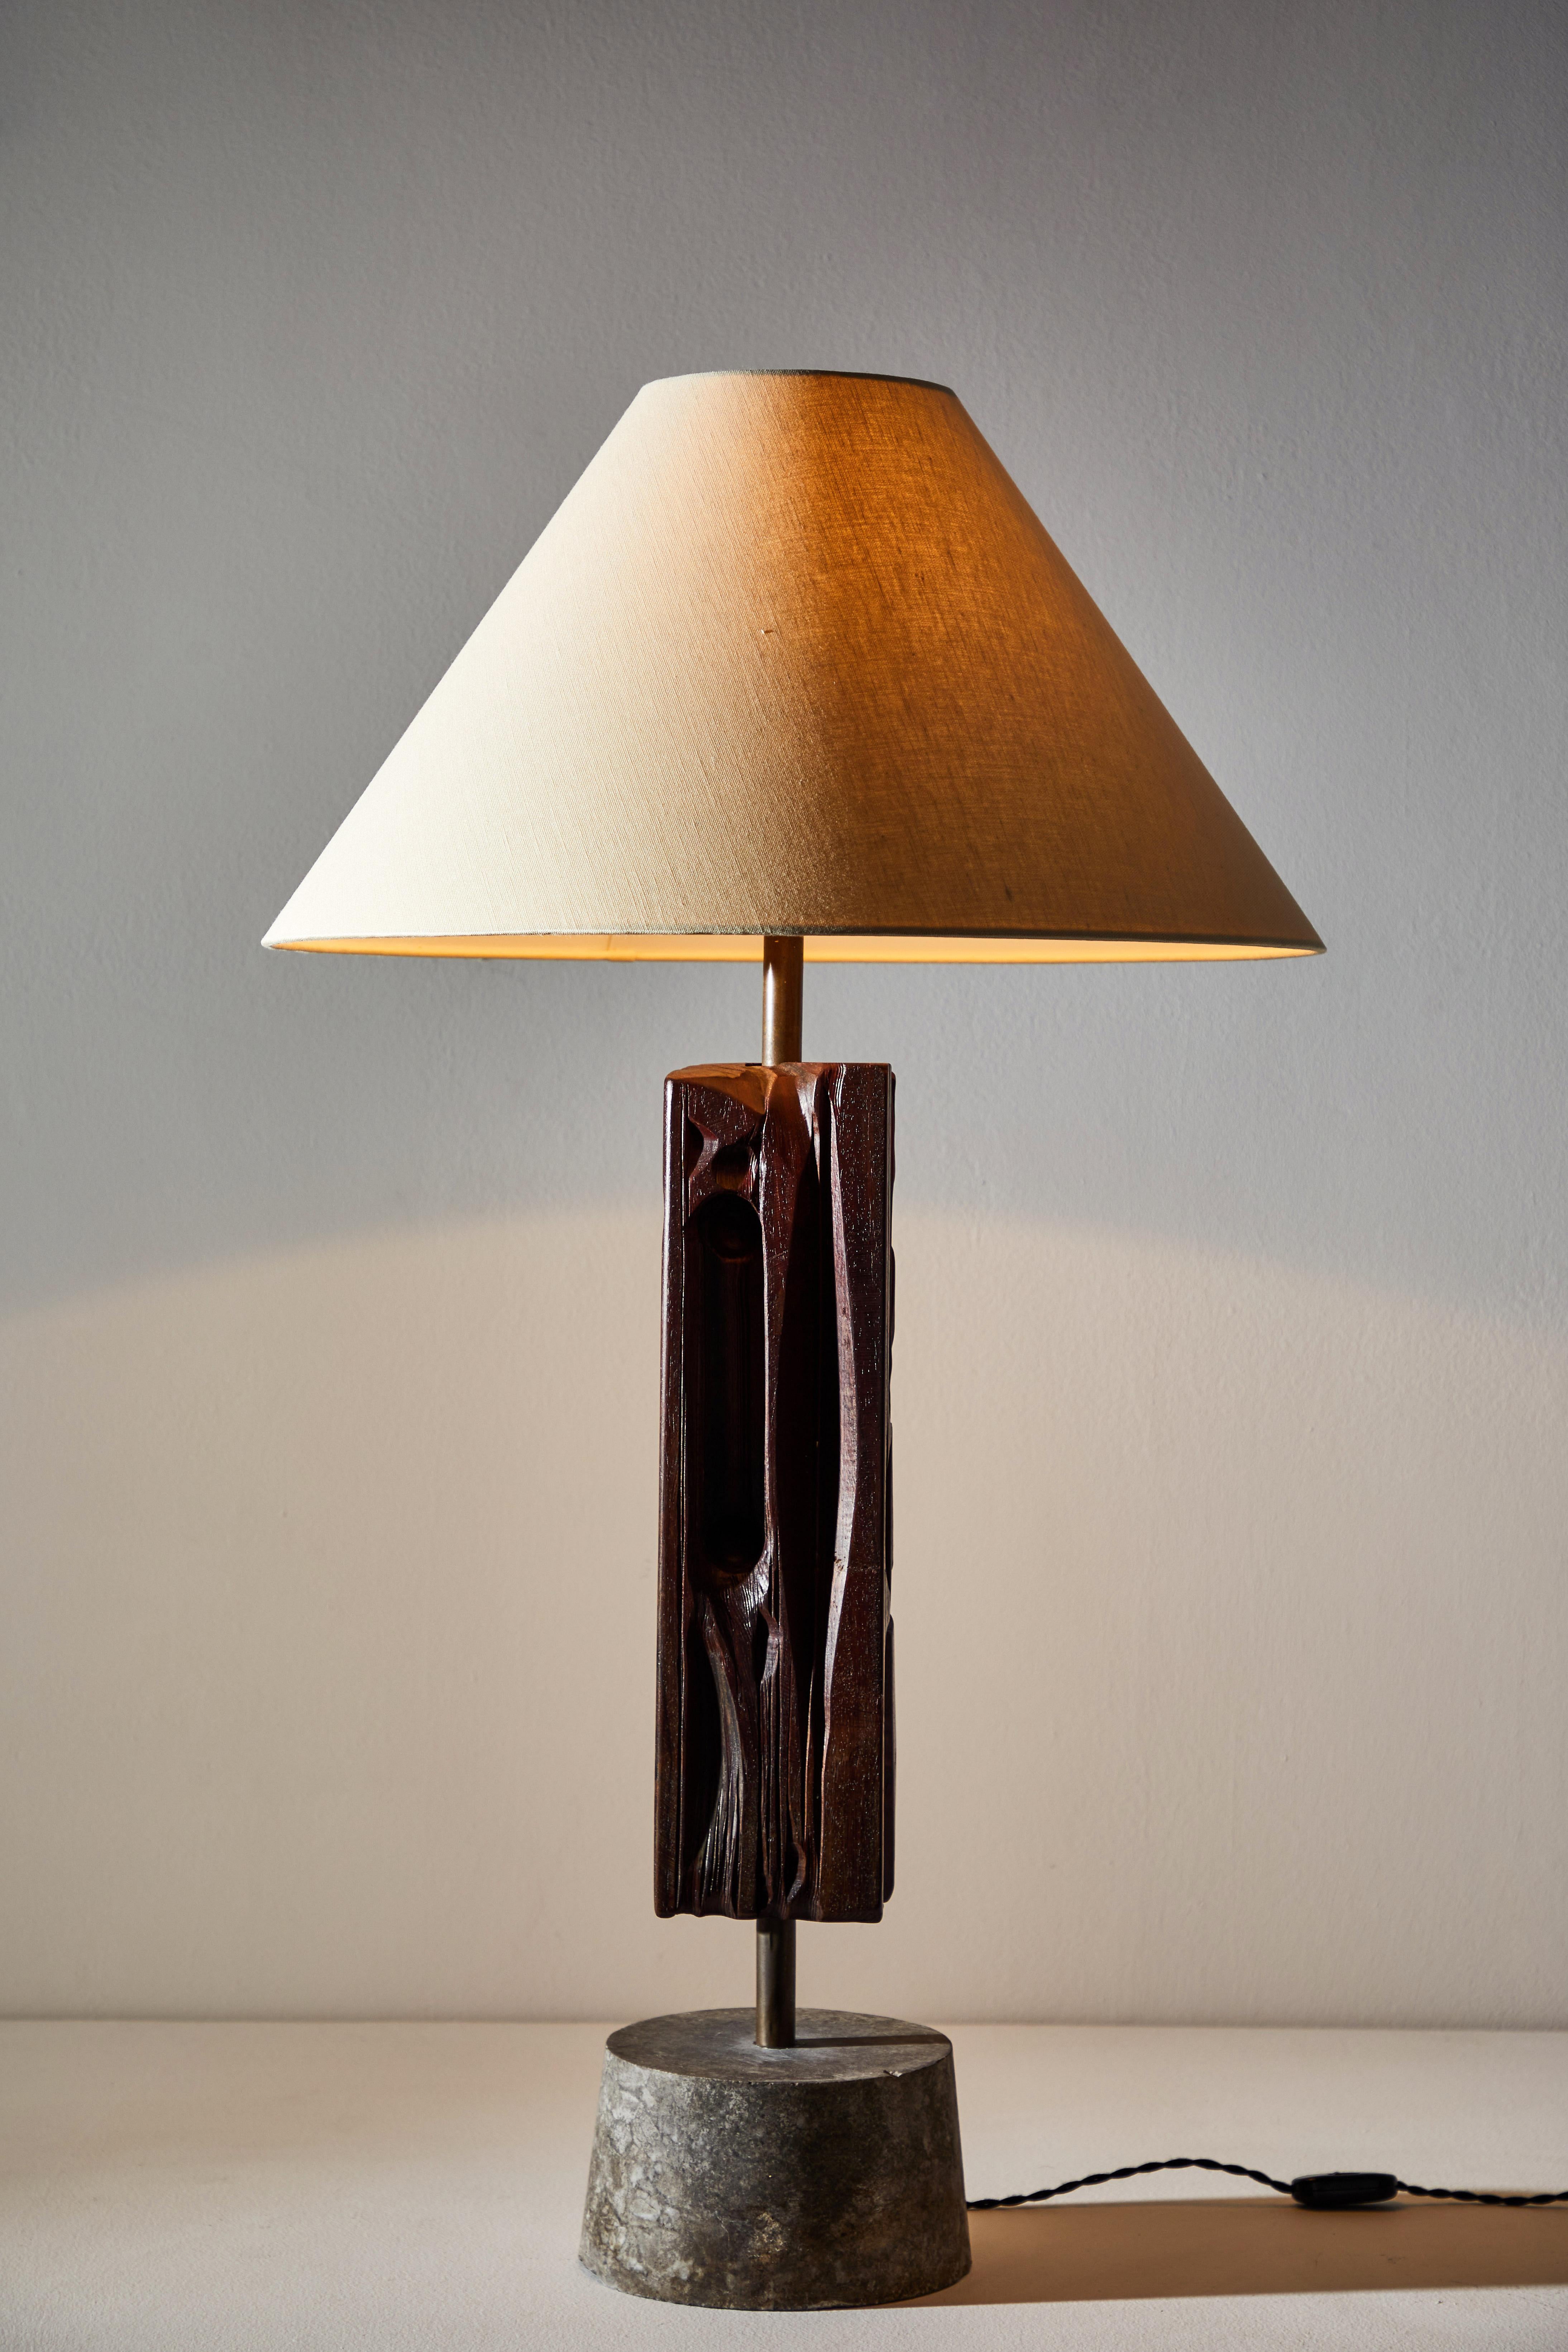 Unique pair of rare sculptures mounted as table Lamps by Yasuo Fuke in Italy, circa 1970s. Hand carved wood, brass, marble. Rewired for US standards with black french twist cord. Custom linens shades. Signed and numbered by the artist. We recommend